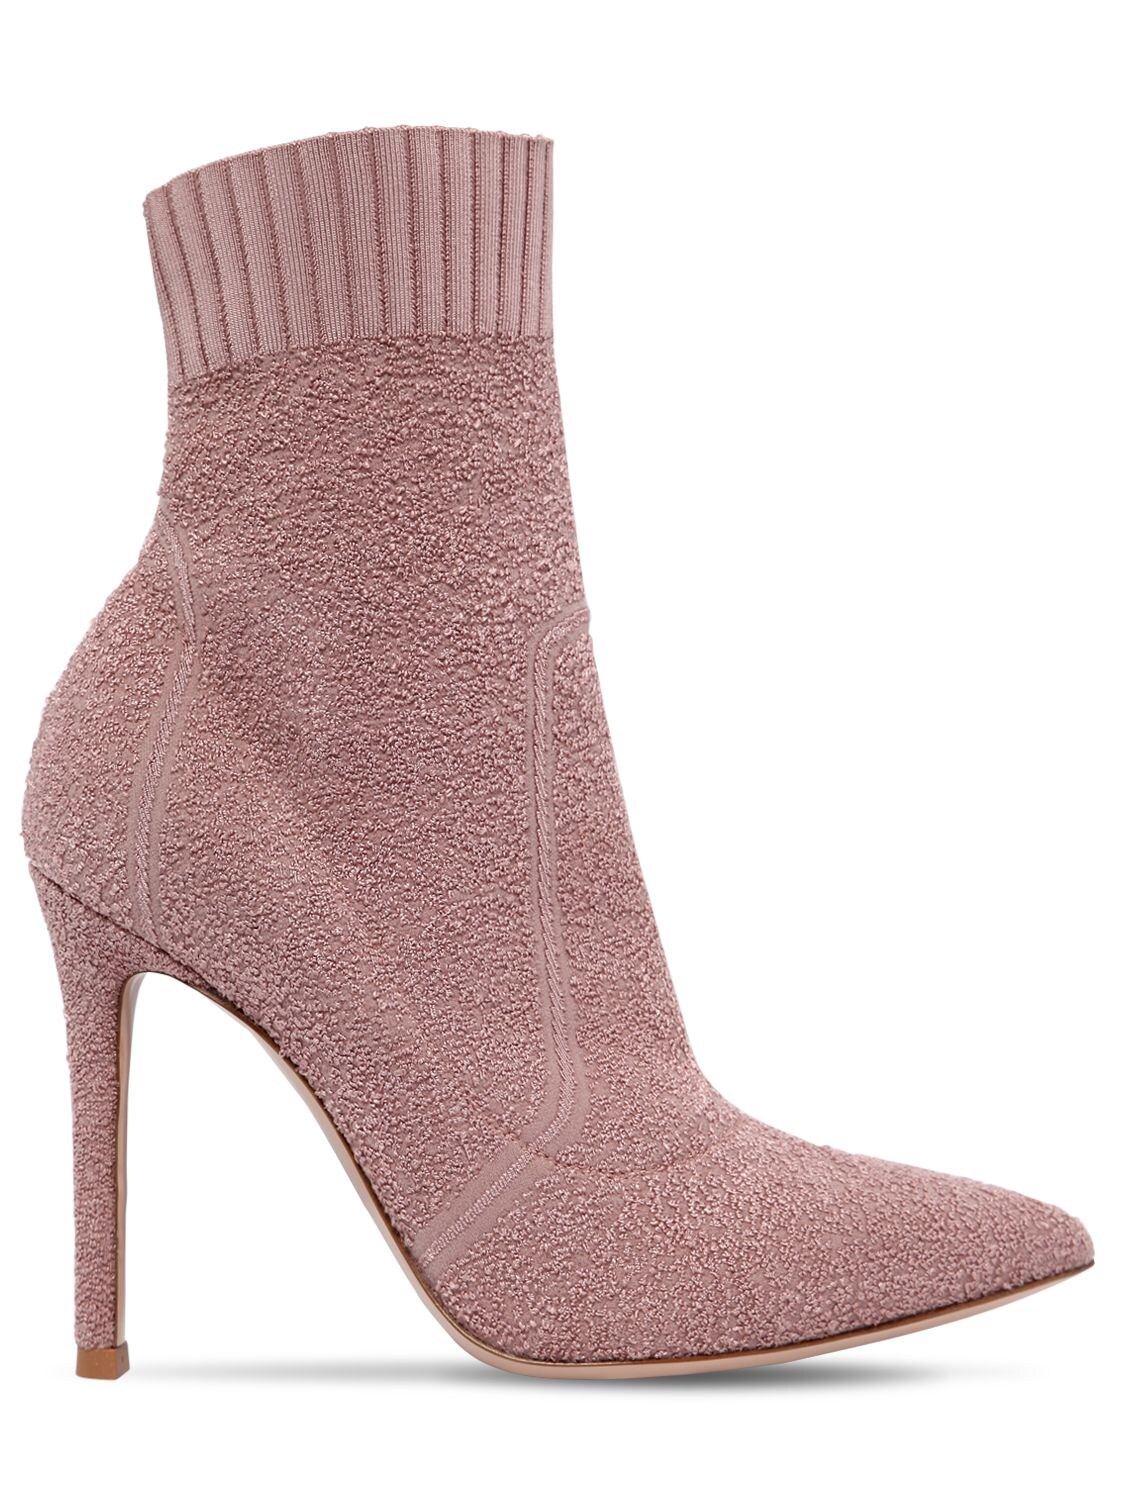 Gianvito Rossi 100mm Fiona Boucle Knit Boots In Blush